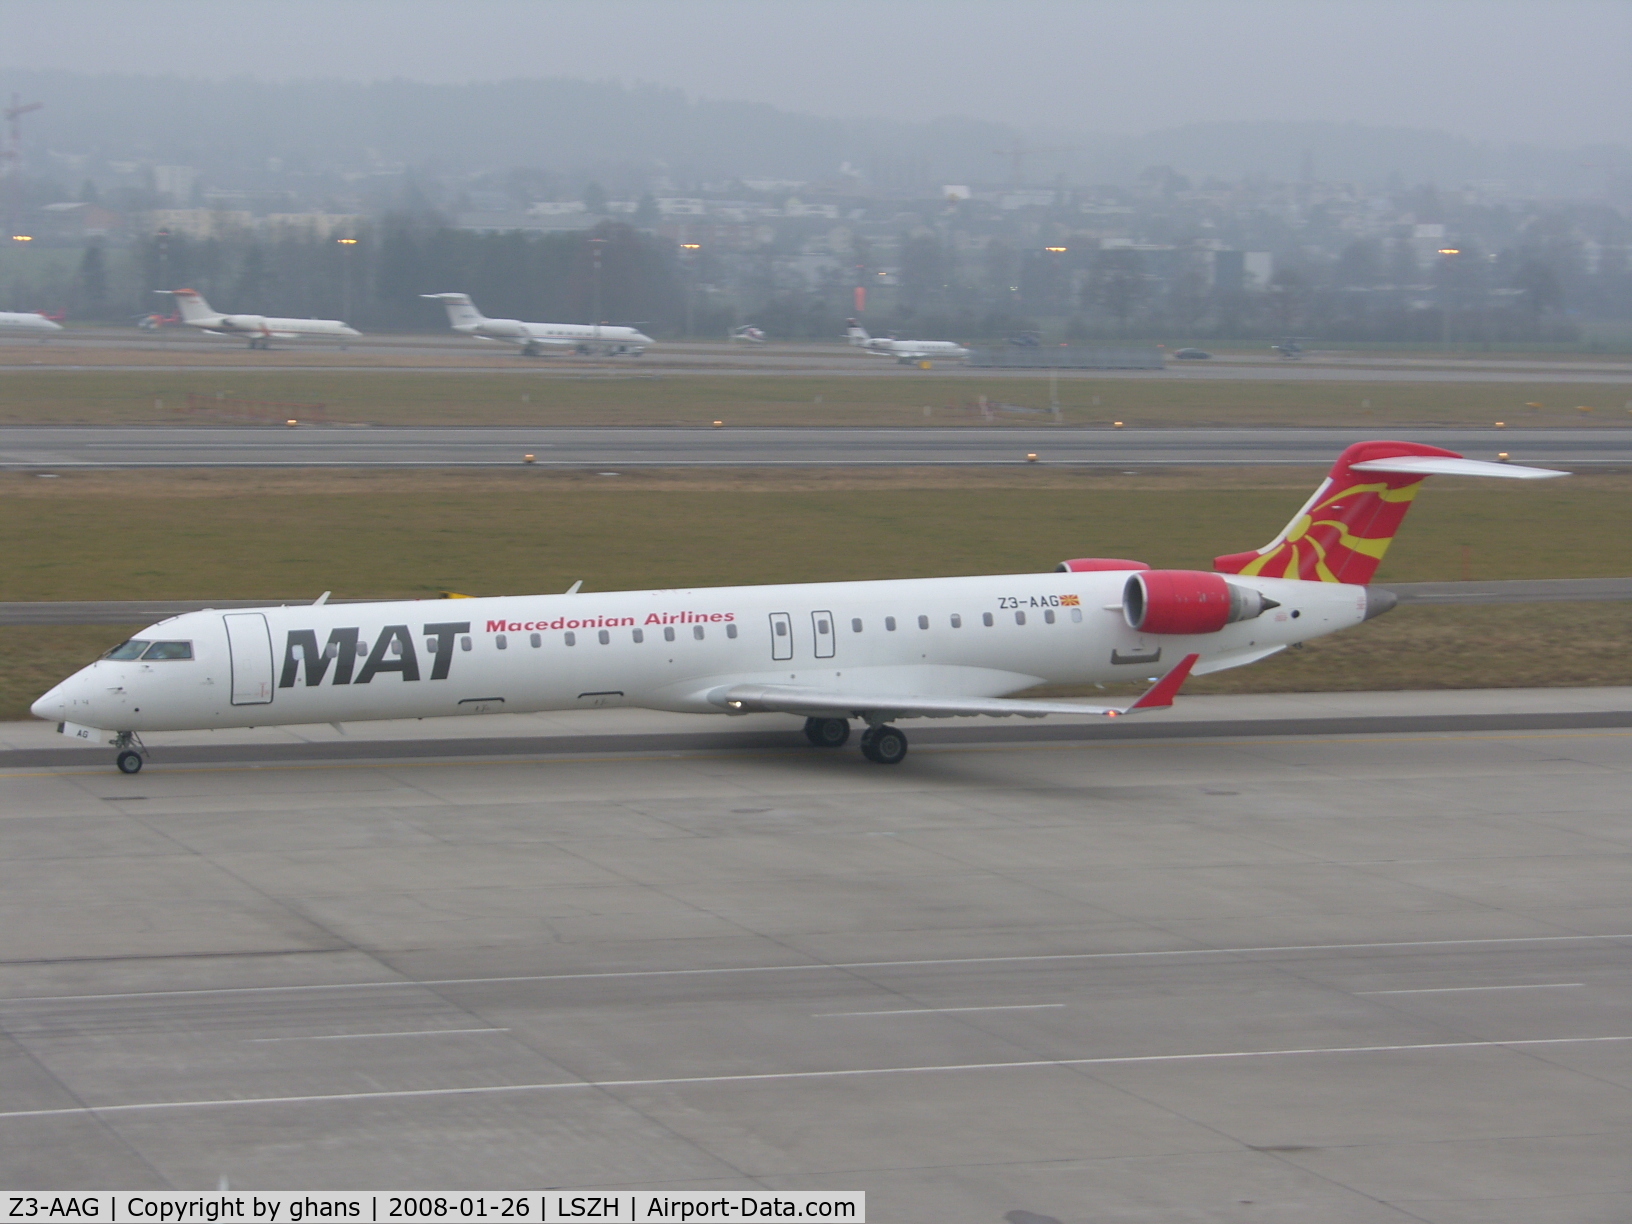 Z3-AAG, 2001 Bombardier CRJ-900LR (CL-600-2D24) C/N 15001, Just arrived from Macedonia